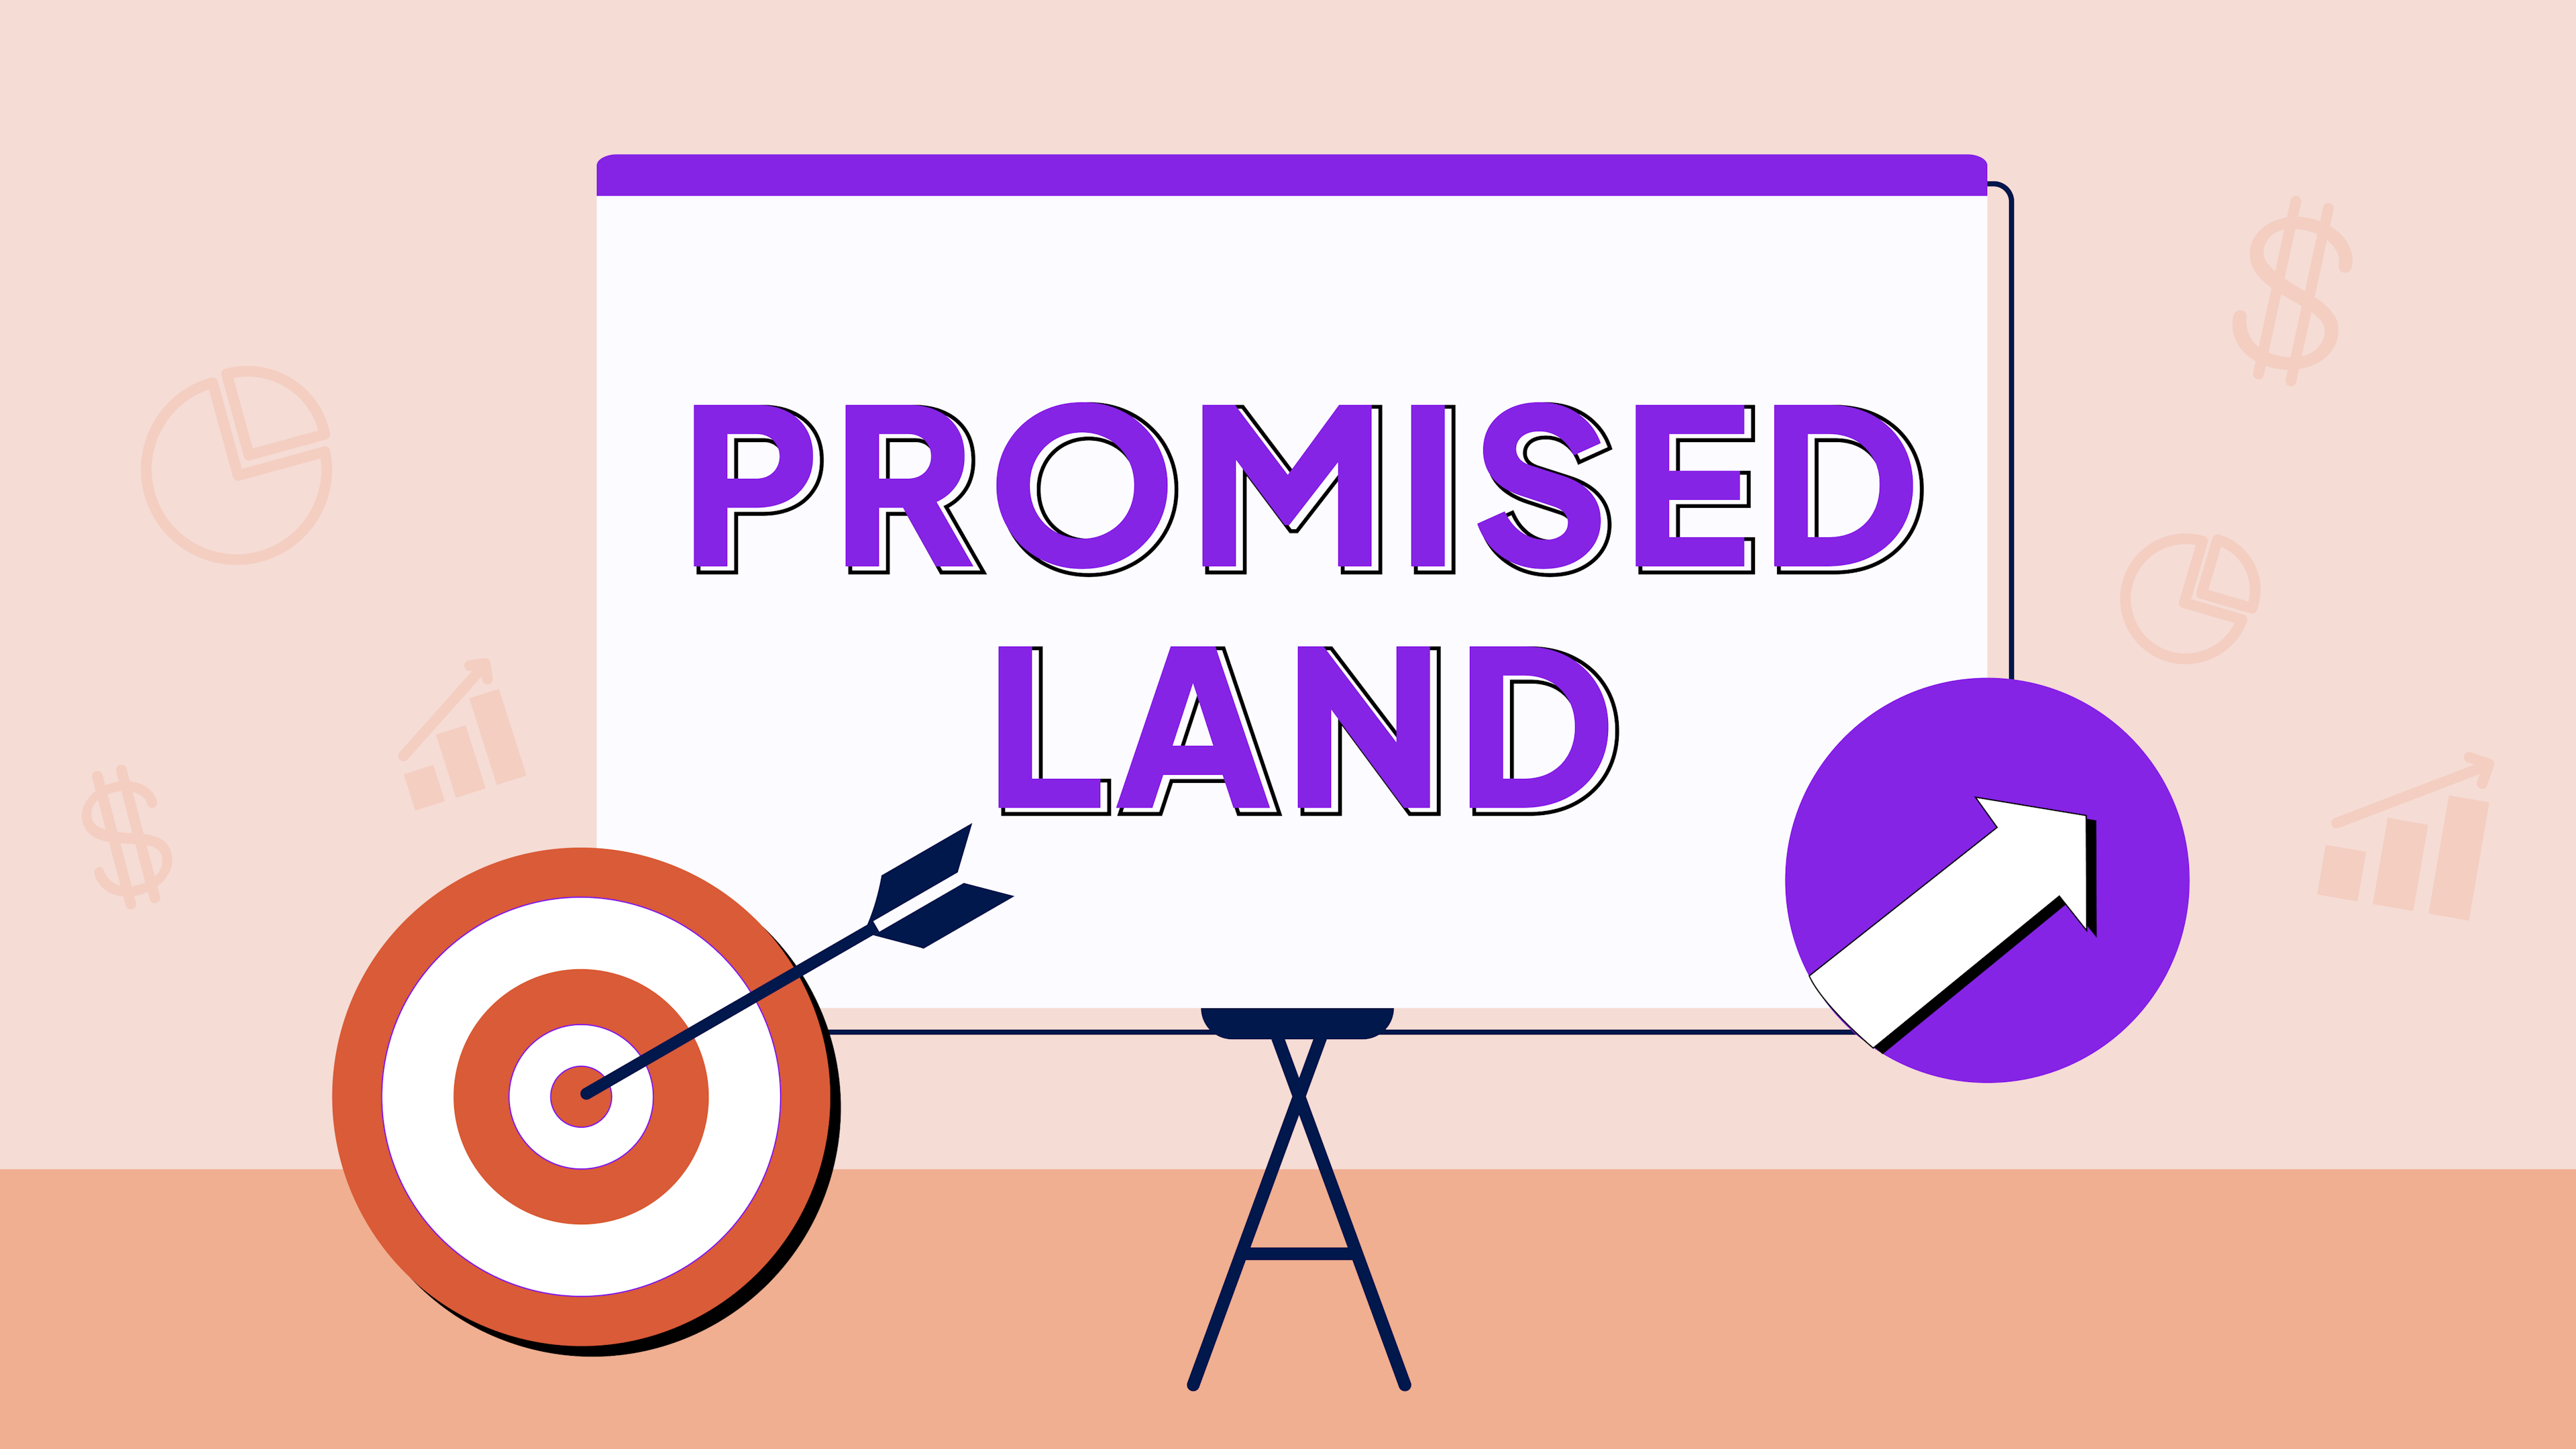 What is your promised land? preview